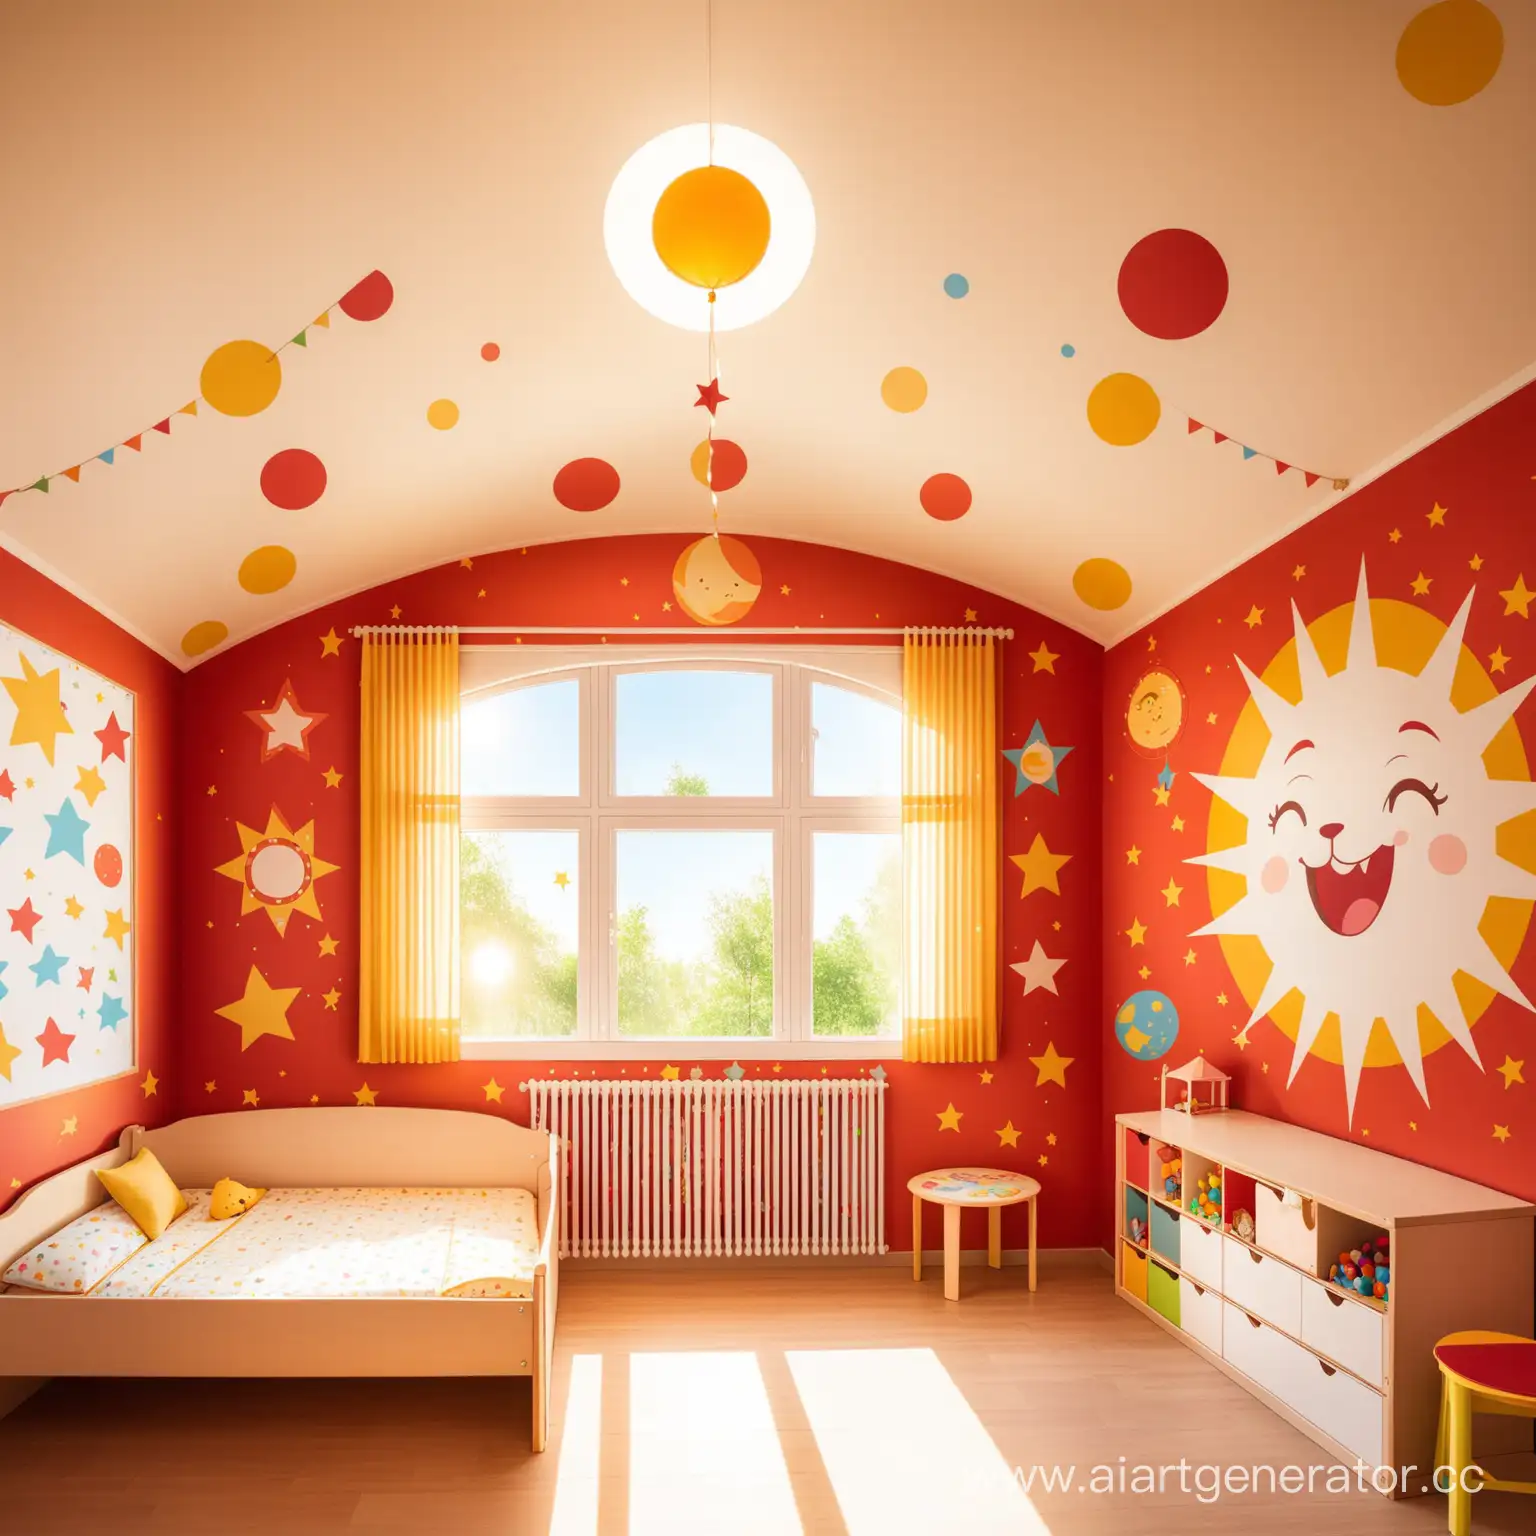 A child's room with circus decorations and drawings of the sun